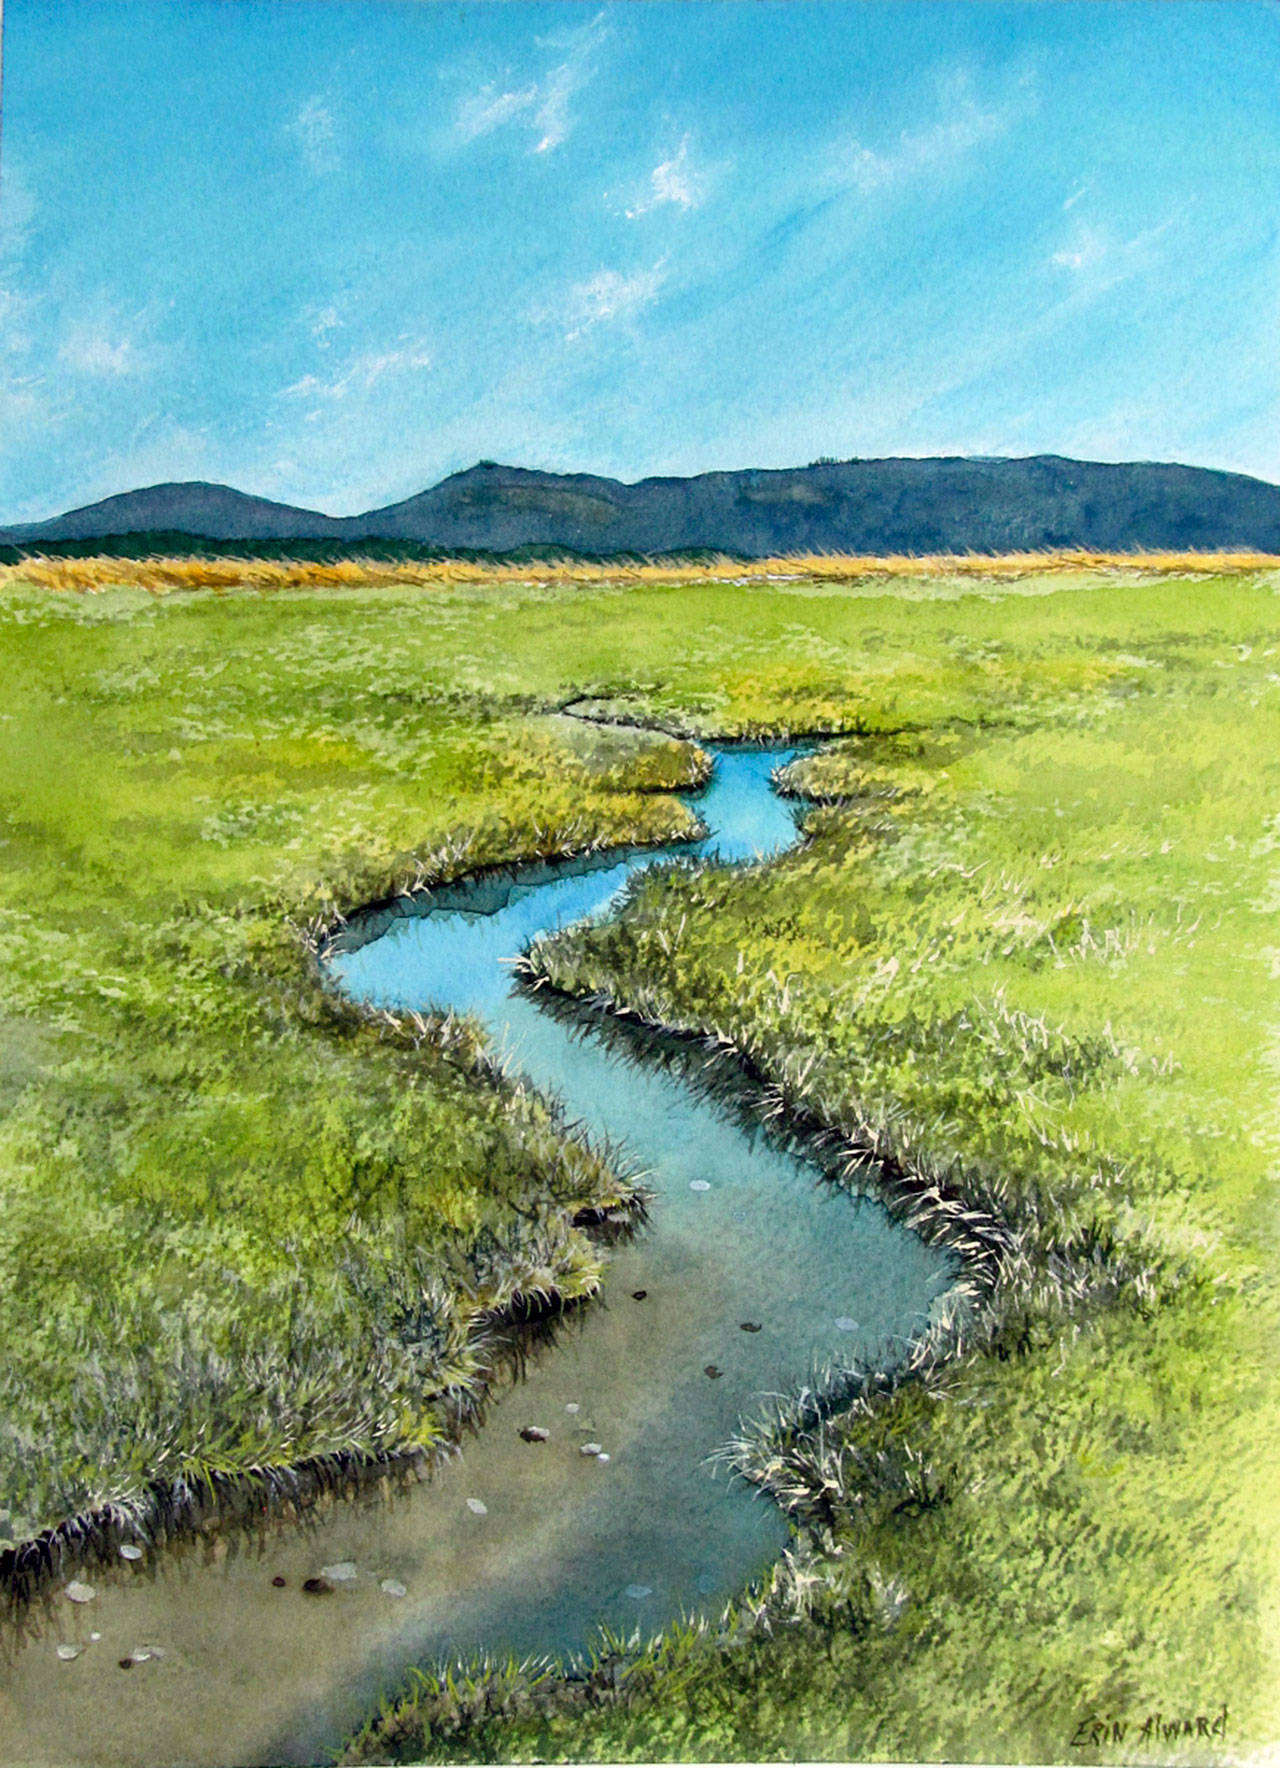 Painter Erin Alward’s “Marsh” will be on display today at Imagine It Framed for Second Weekend Art Walk. (Erin Alward)